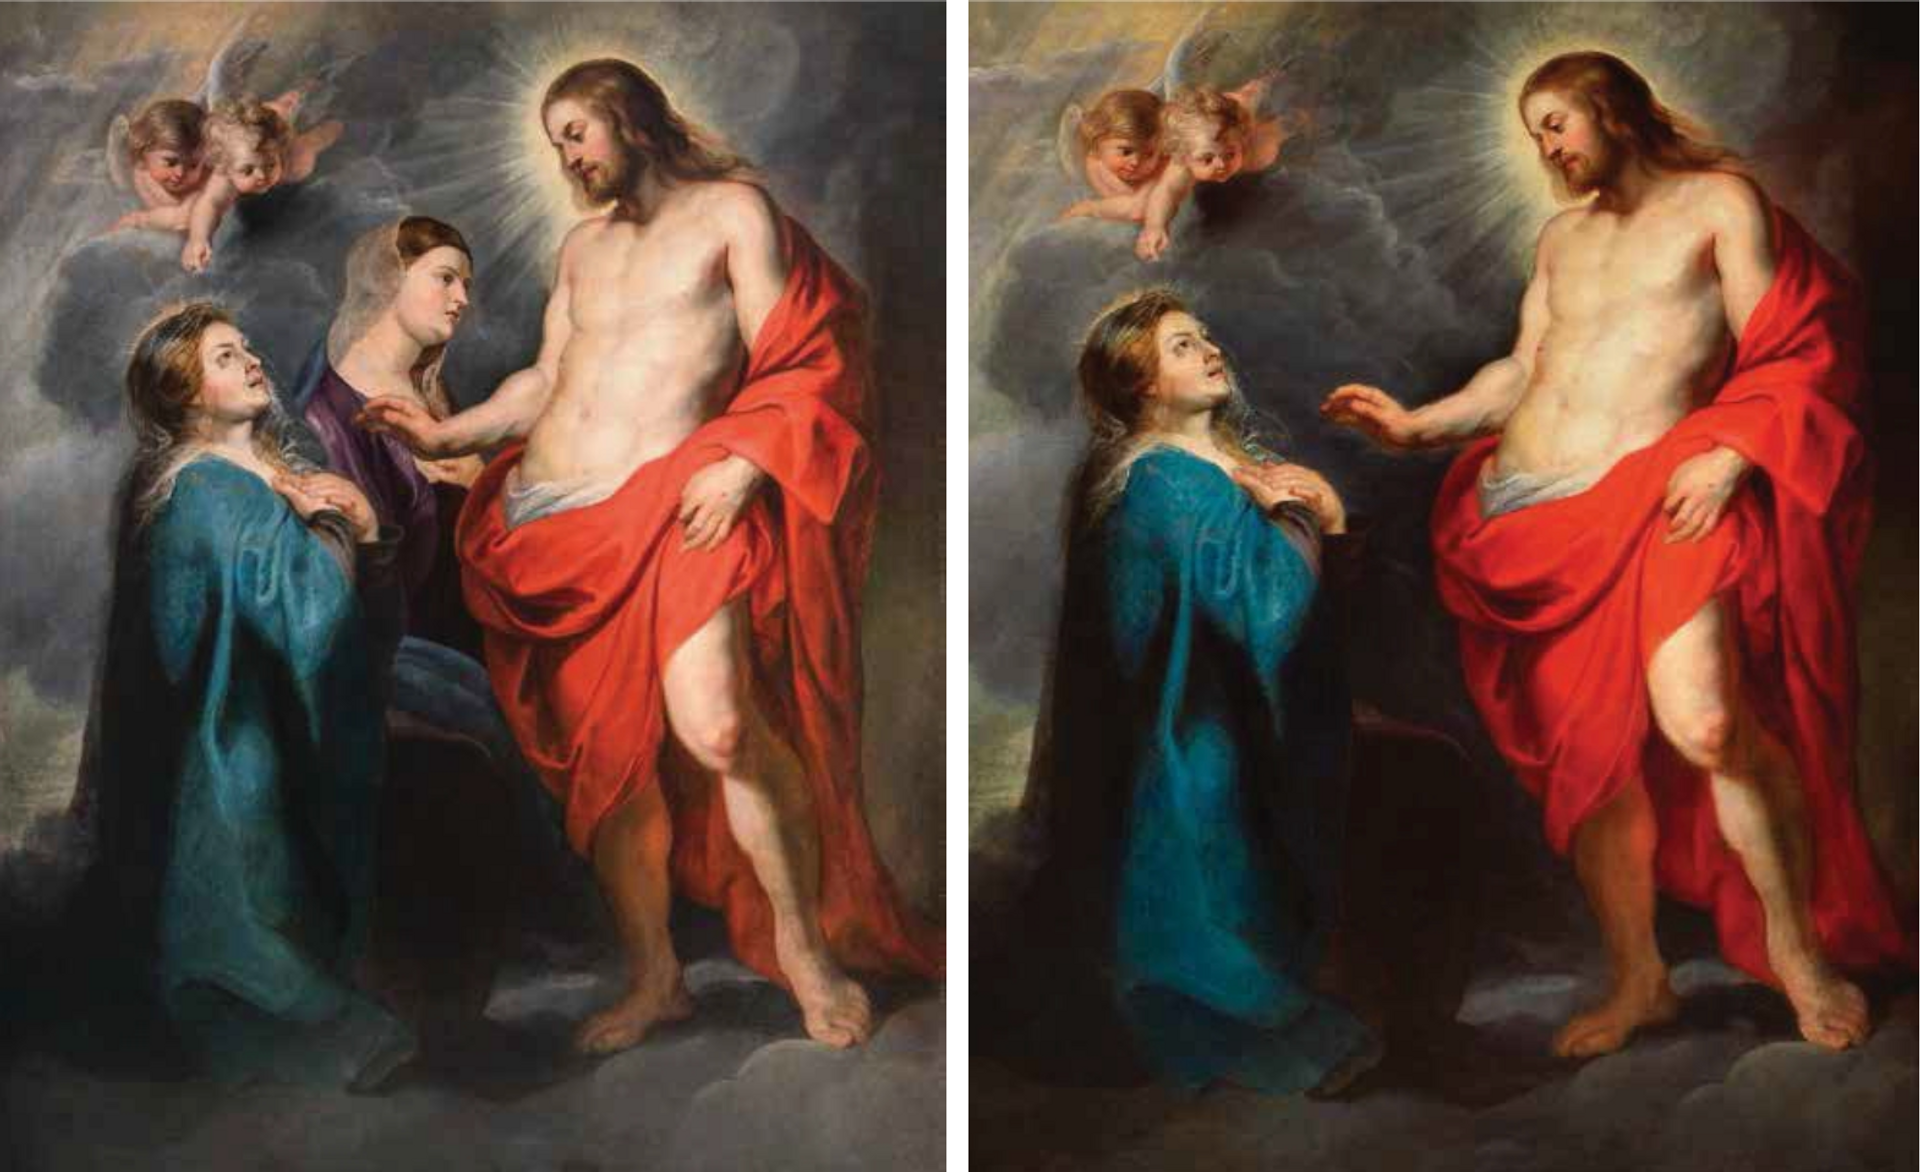 The resurrected Christ appears to his mother (around 1612-16) by Peter Paul Rubens, before the 2015 restoration with just one Madonna (right) and after restoration with both Madonnas shown (left). Photos: Carabinieri Tutela Patrimonio Culturale